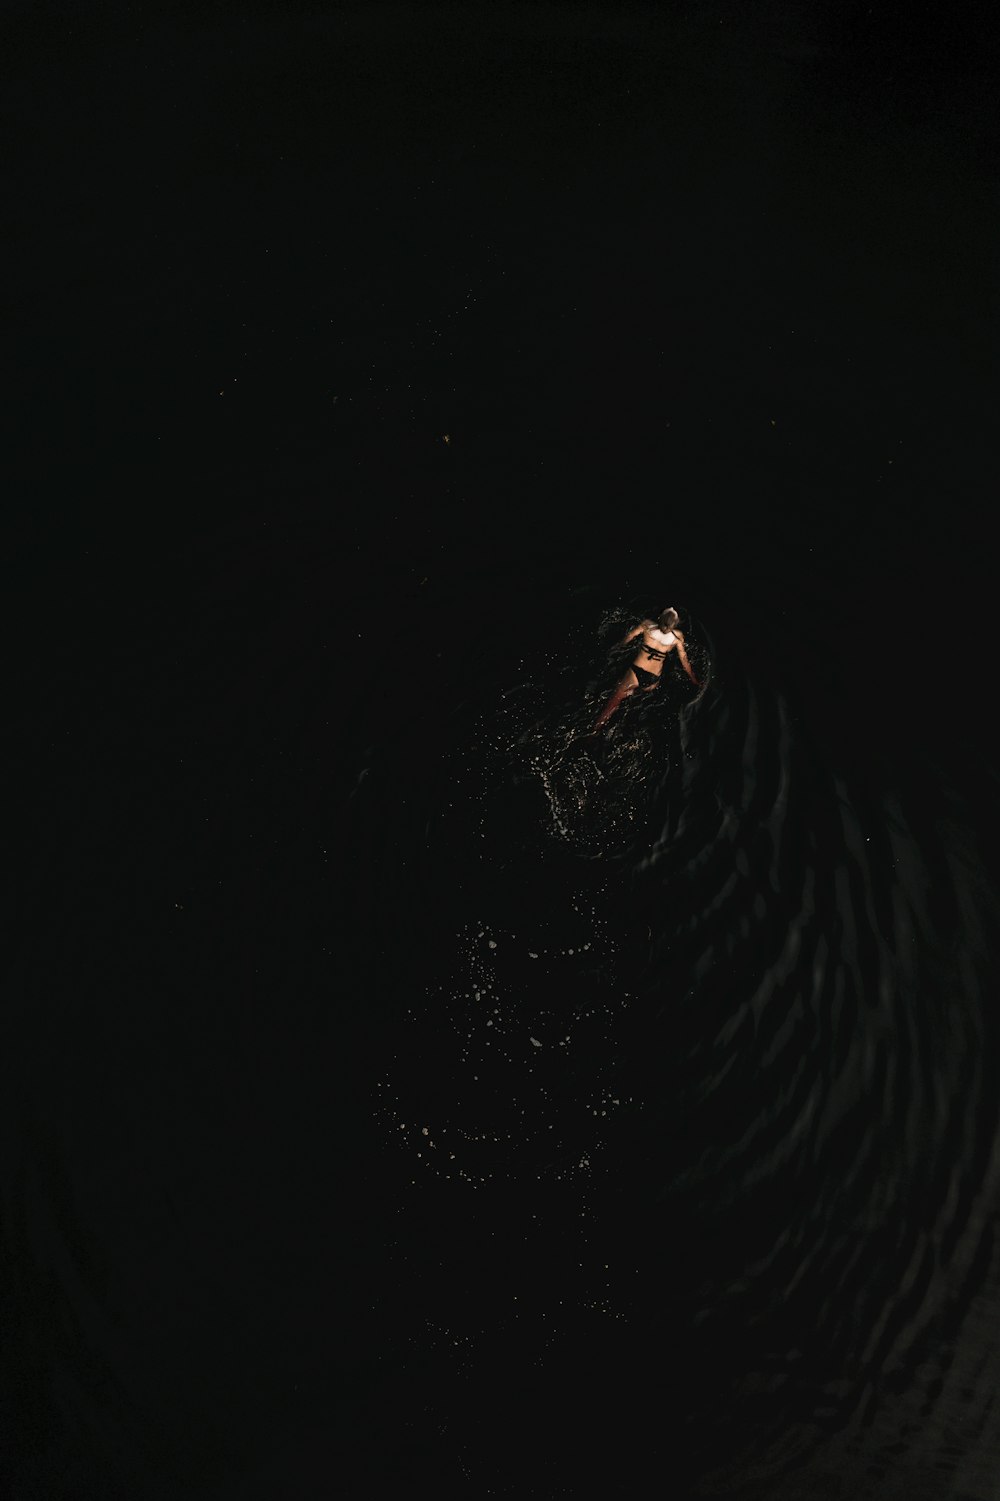 a person floating in the water at night